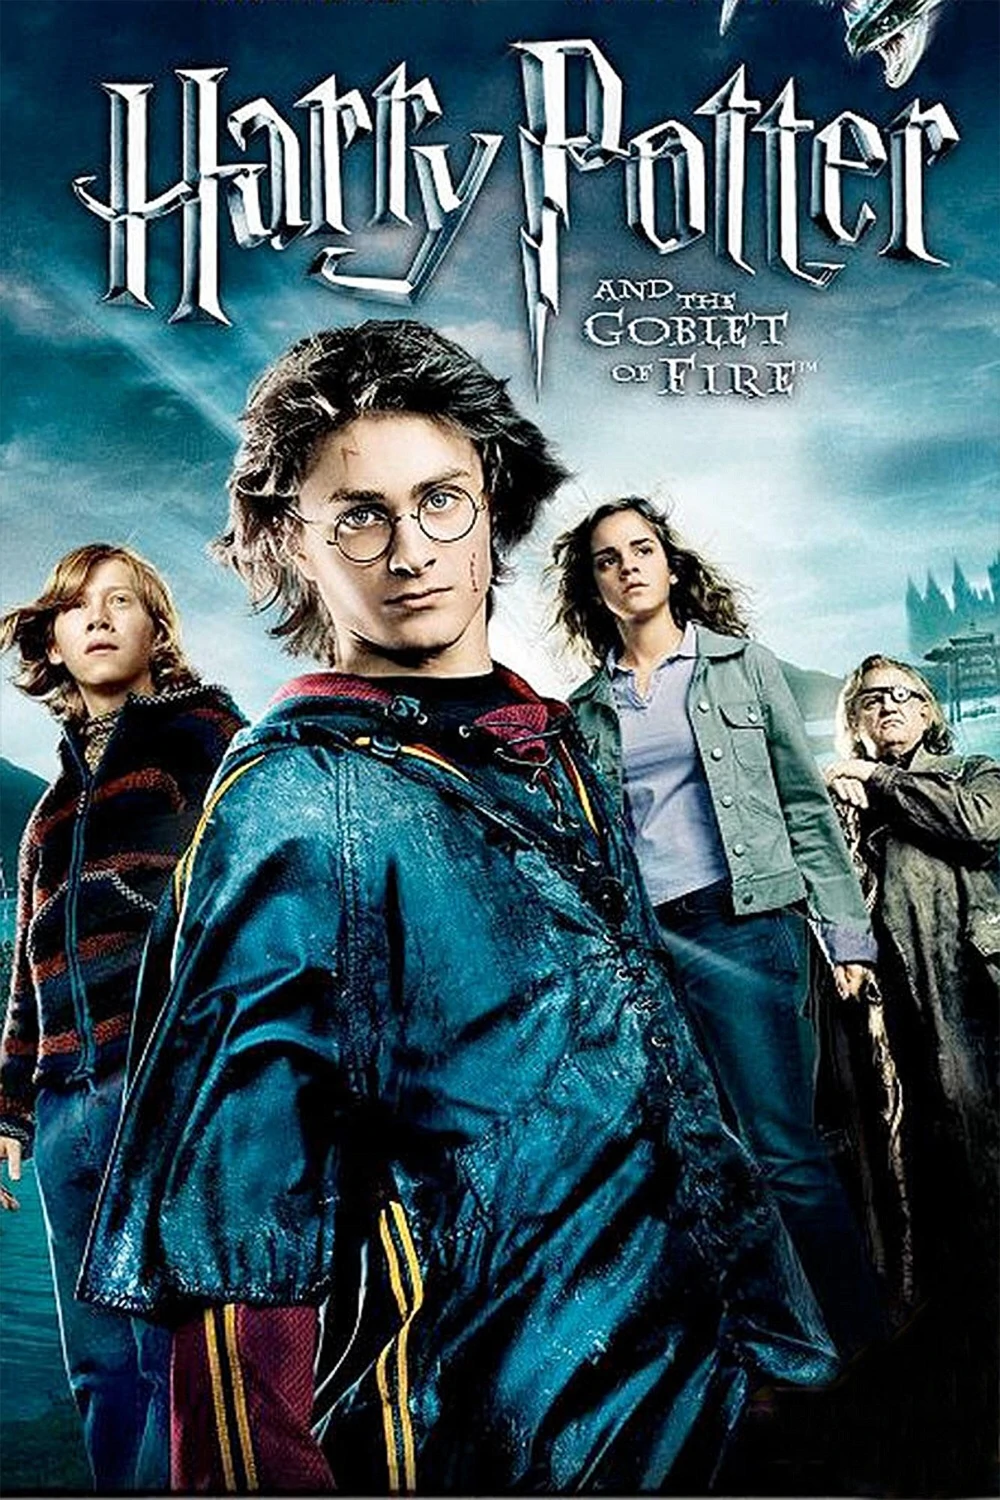 Harry Potter and the Goblet of Fire (film) - Wikipedia